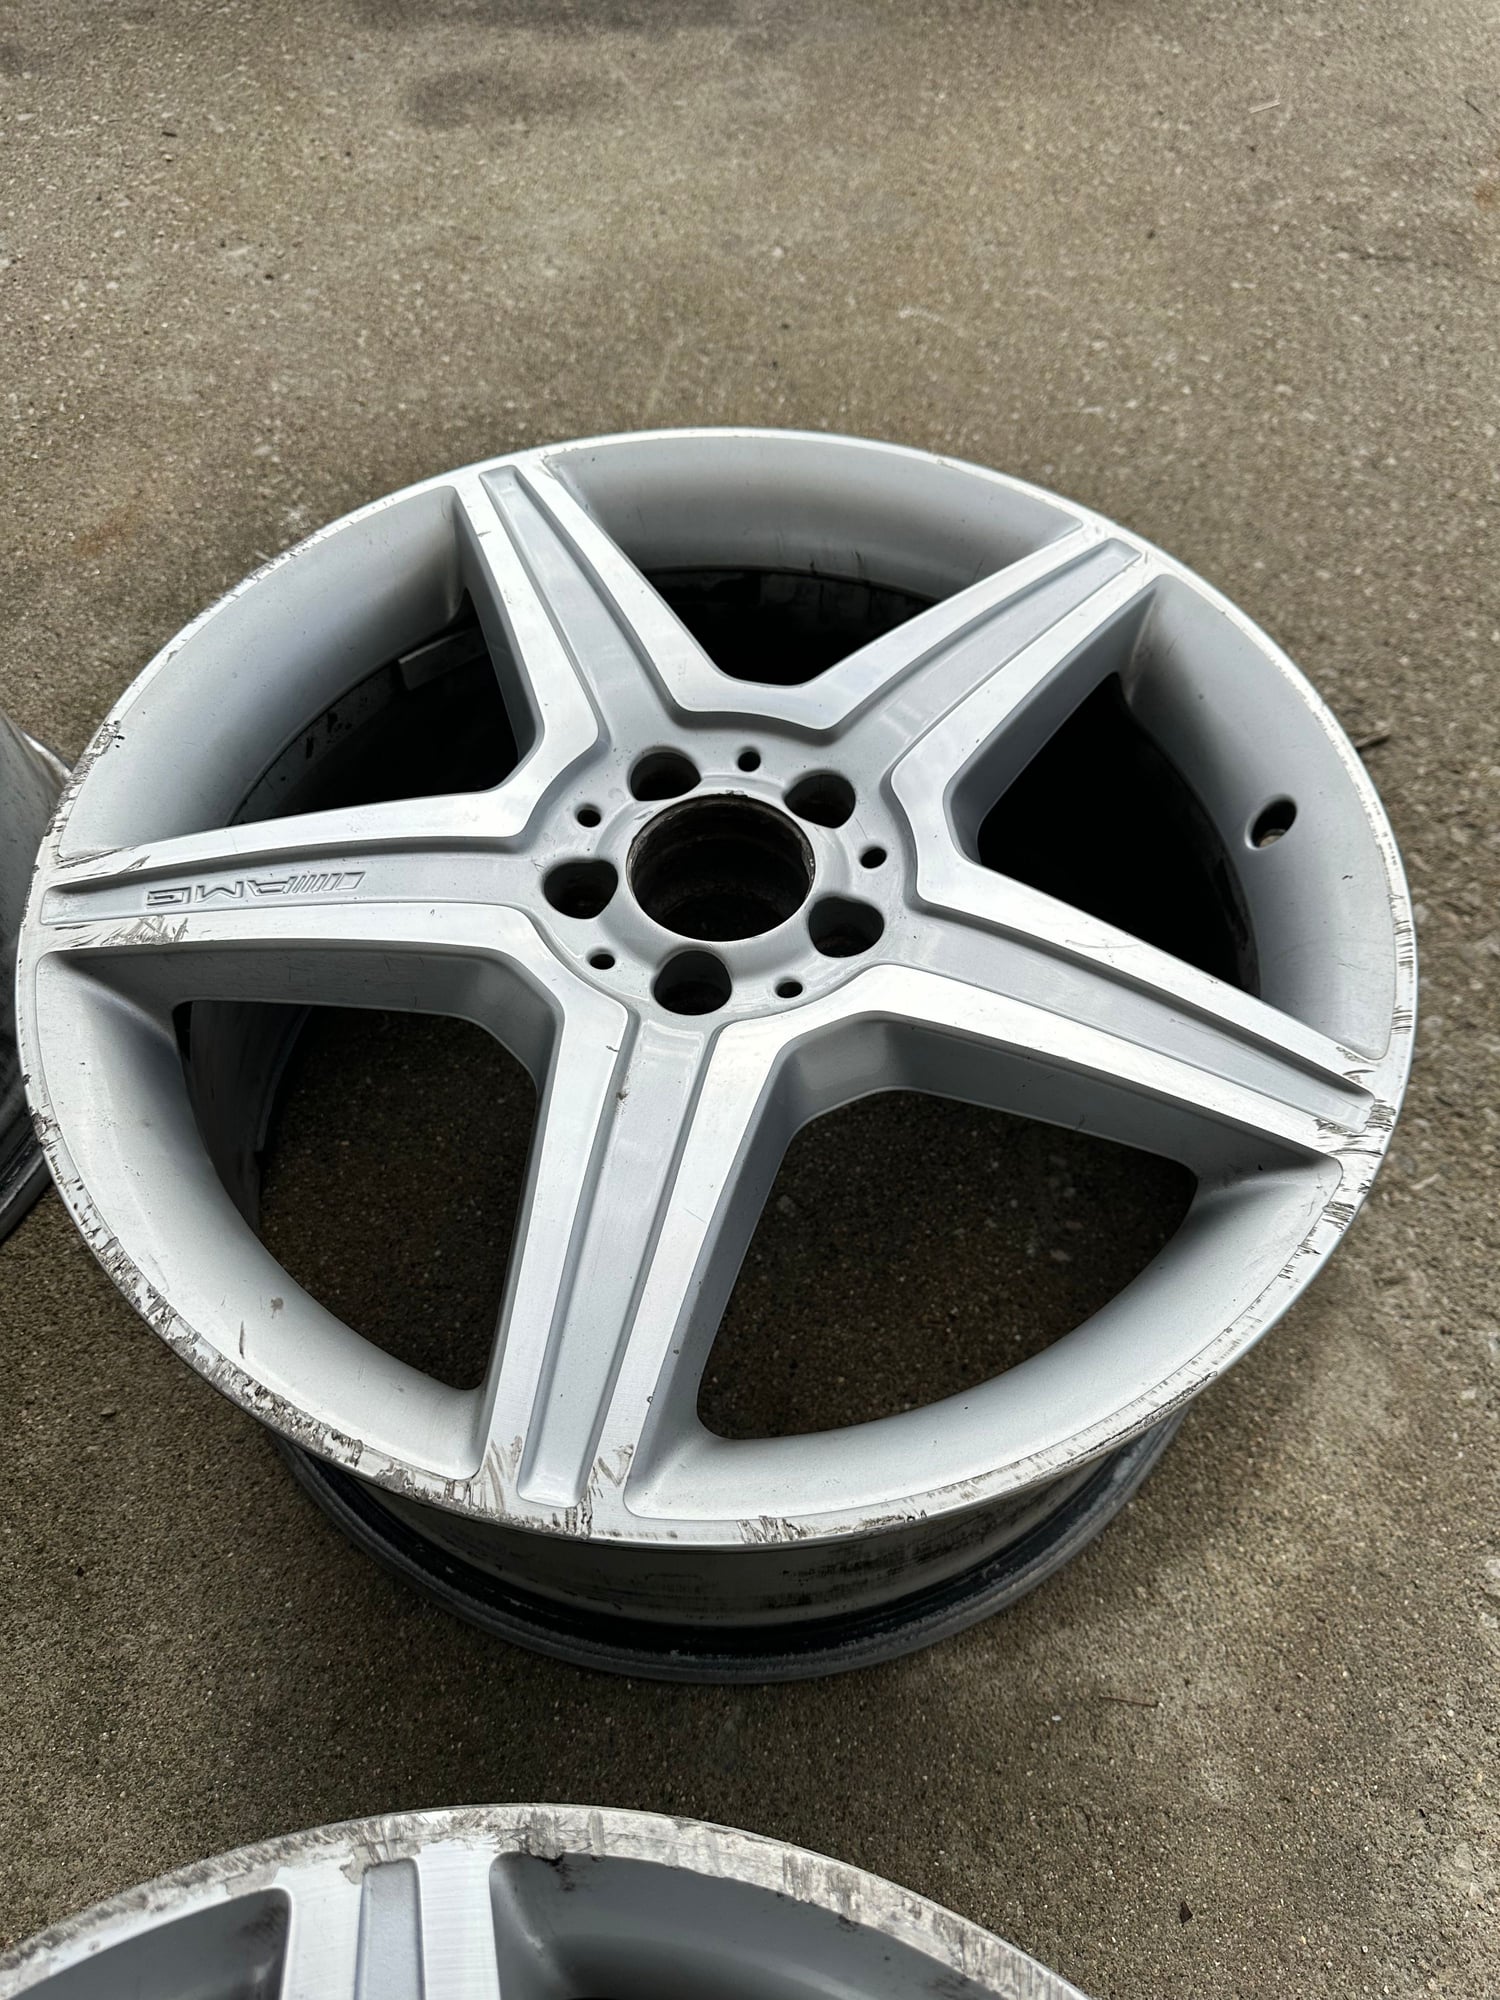 Wheels and Tires/Axles - S550/Cl550 OEM 19” AMG Wheels - Used - 2008 to 2012 Mercedes-Benz S550 - 2008 to 2012 Mercedes-Benz CL550 - Columbus, OH 43213, United States